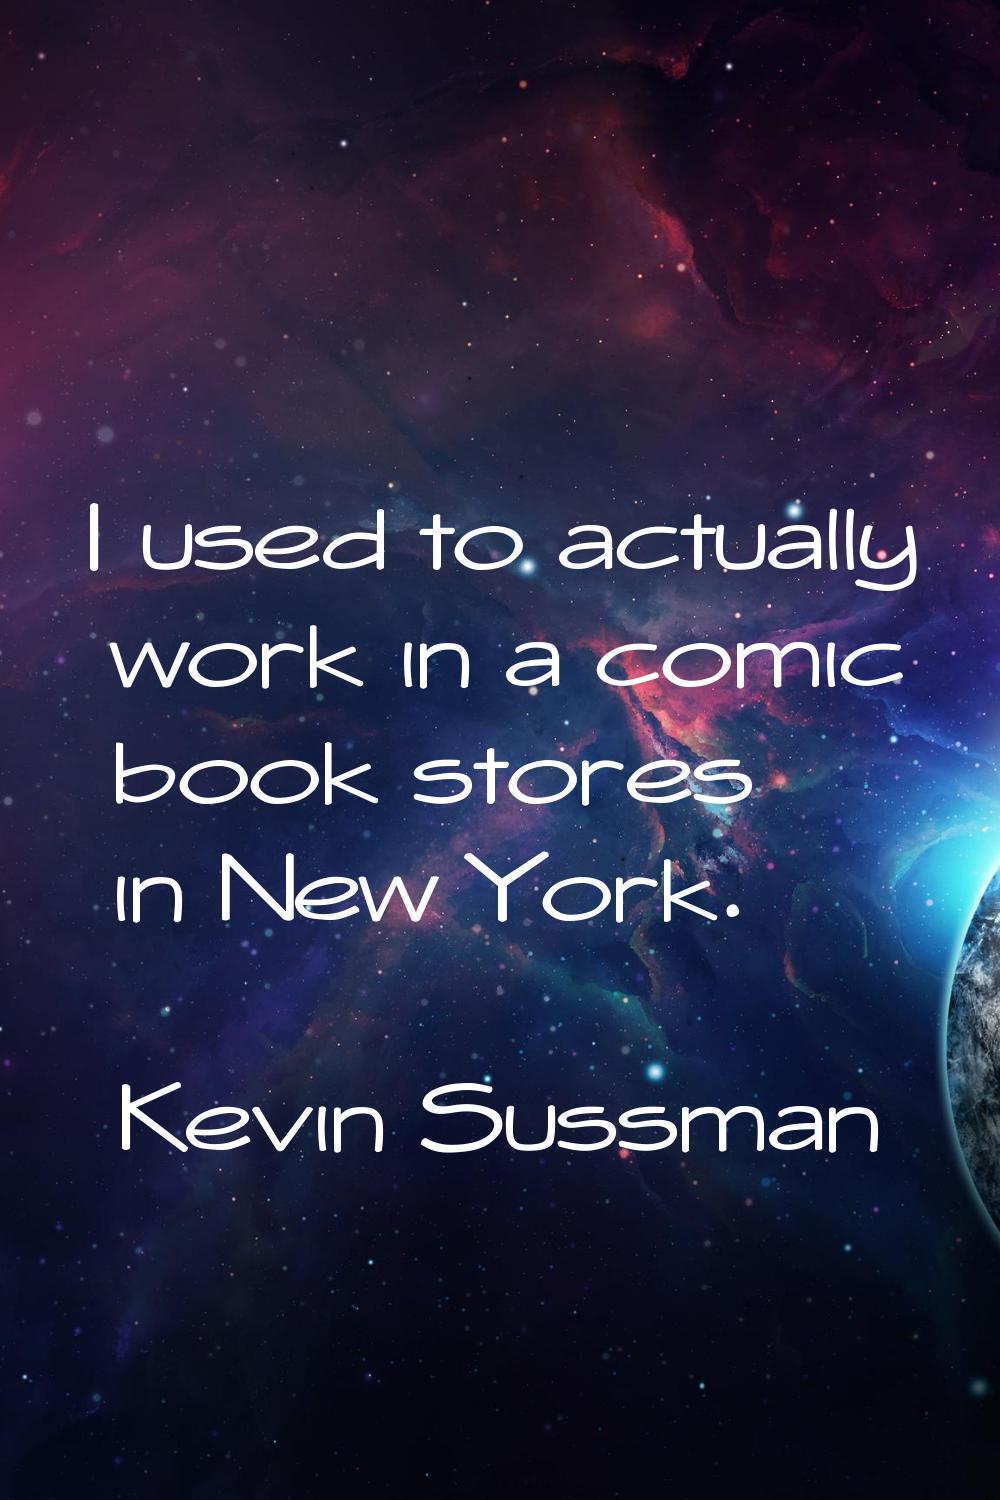 I used to actually work in a comic book stores in New York.